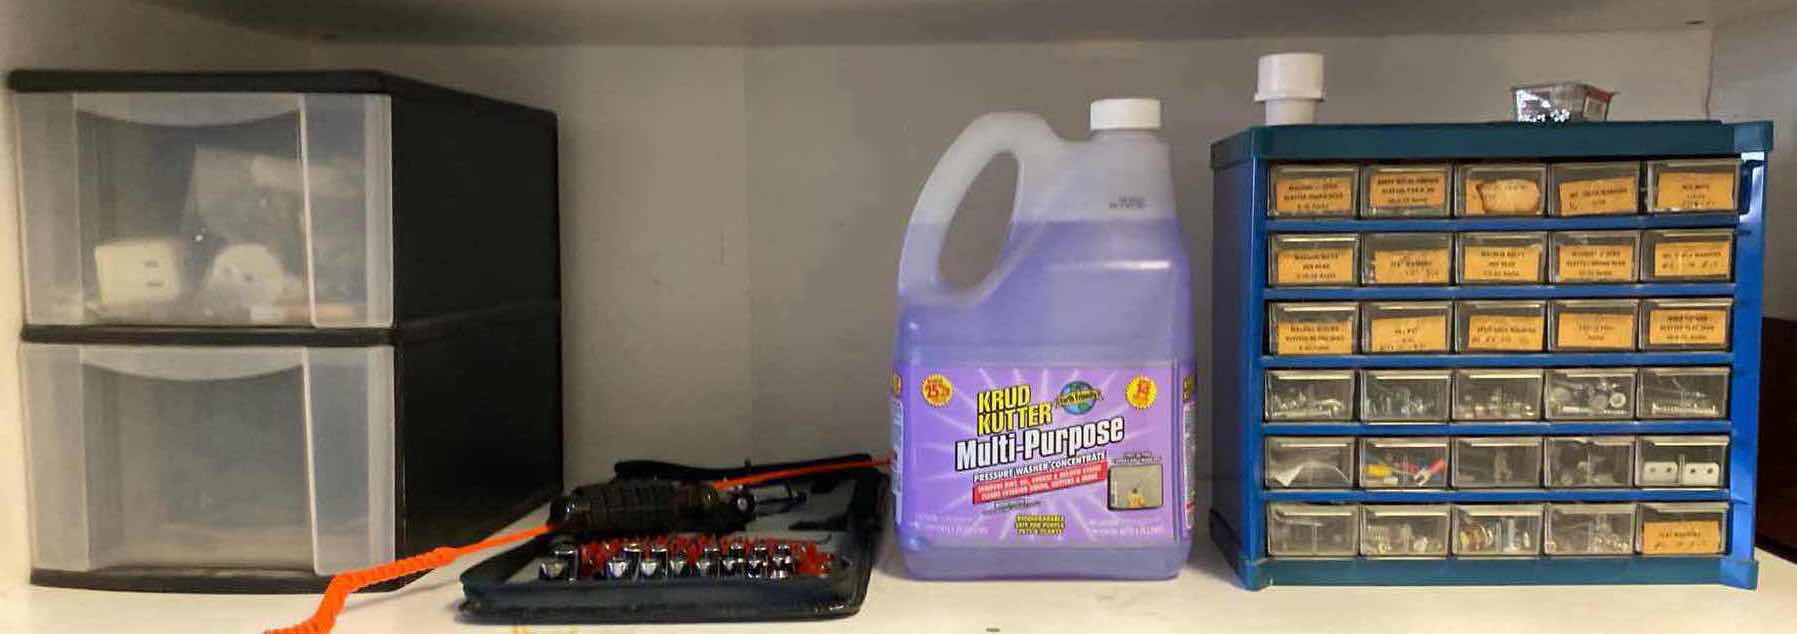 Photo 1 of GARAGE CONTENTS ON SHELF FASTENERS SCREWS CLEANER